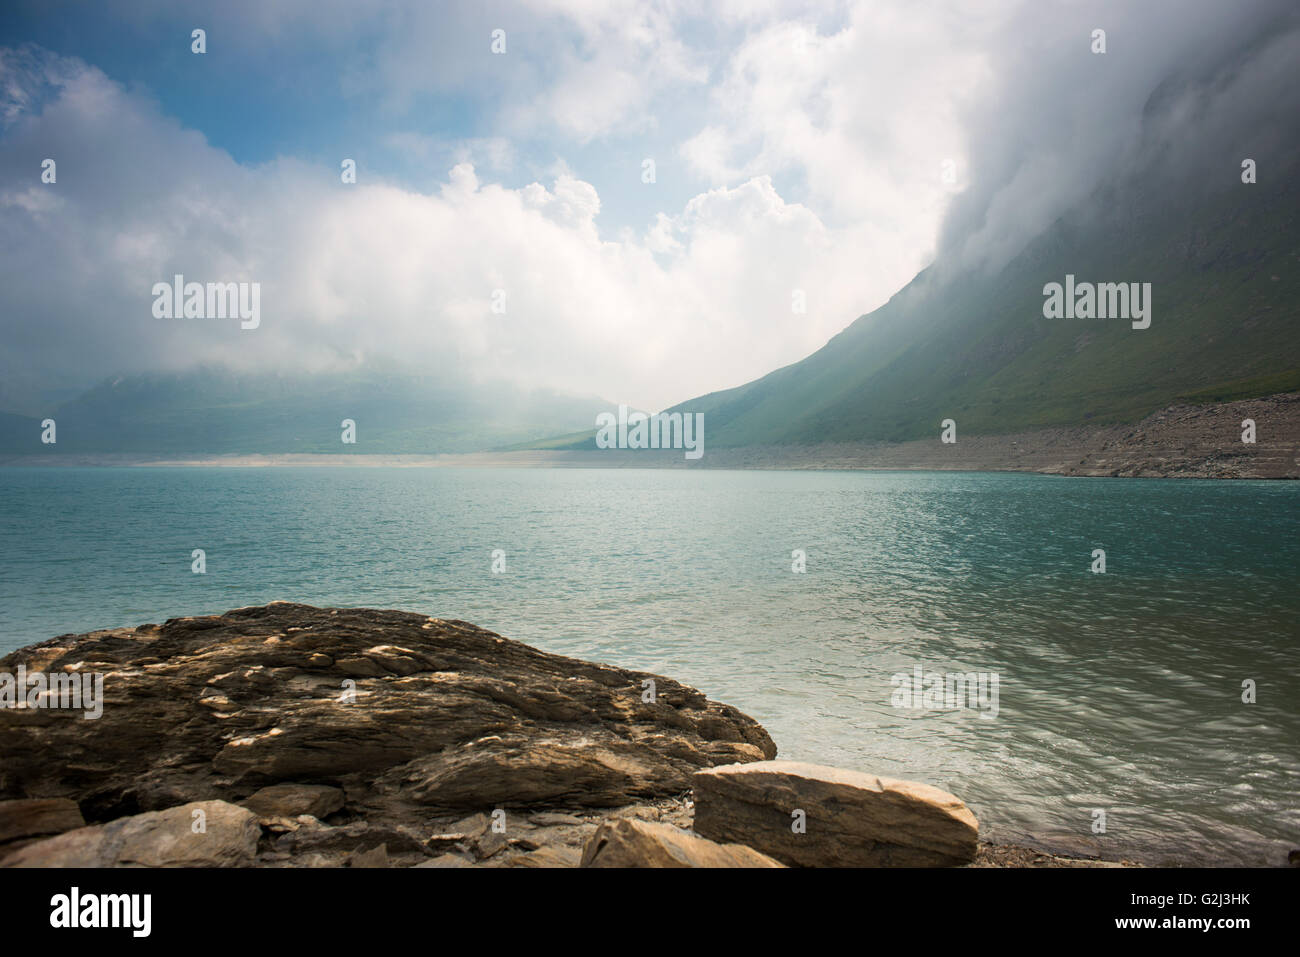 Mountain Lake Against Cloudy Sky, Col du Mont Cenis, Val Cenis Vanoise, France Stock Photo